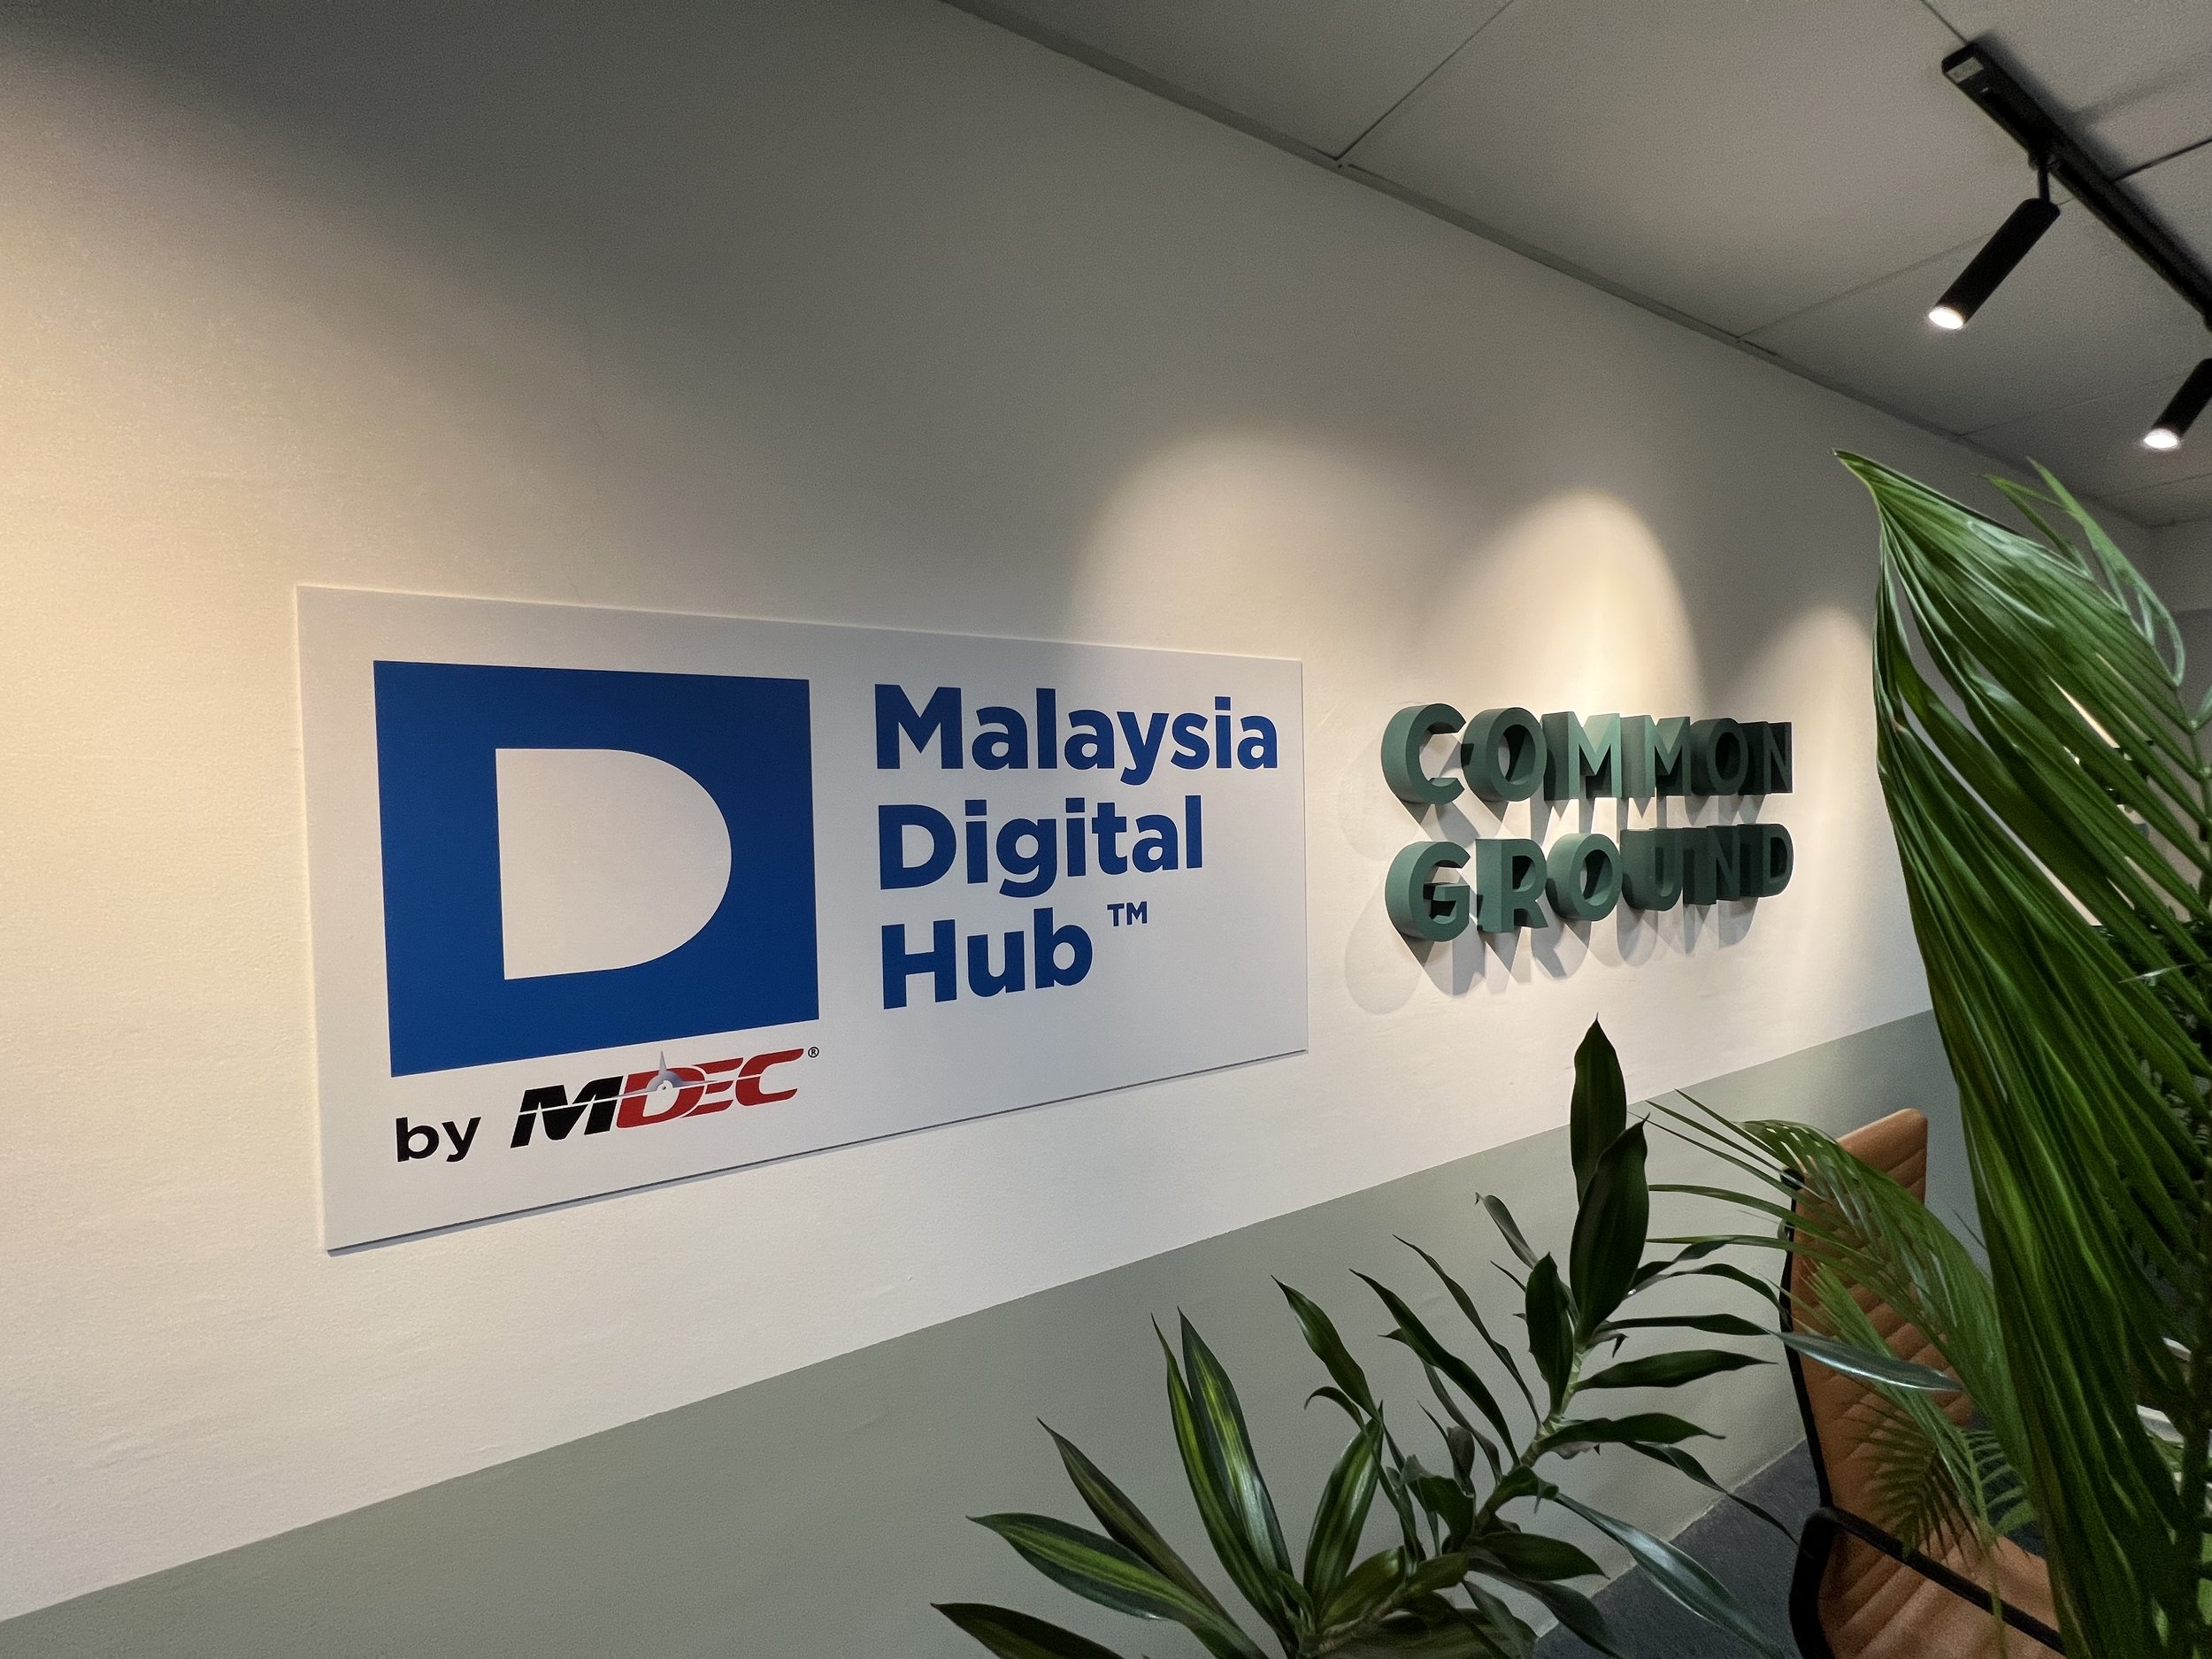 Join for a Virtual Session of MDEC Office Hours For Malaysia Digital Hub (MDH) Startups!